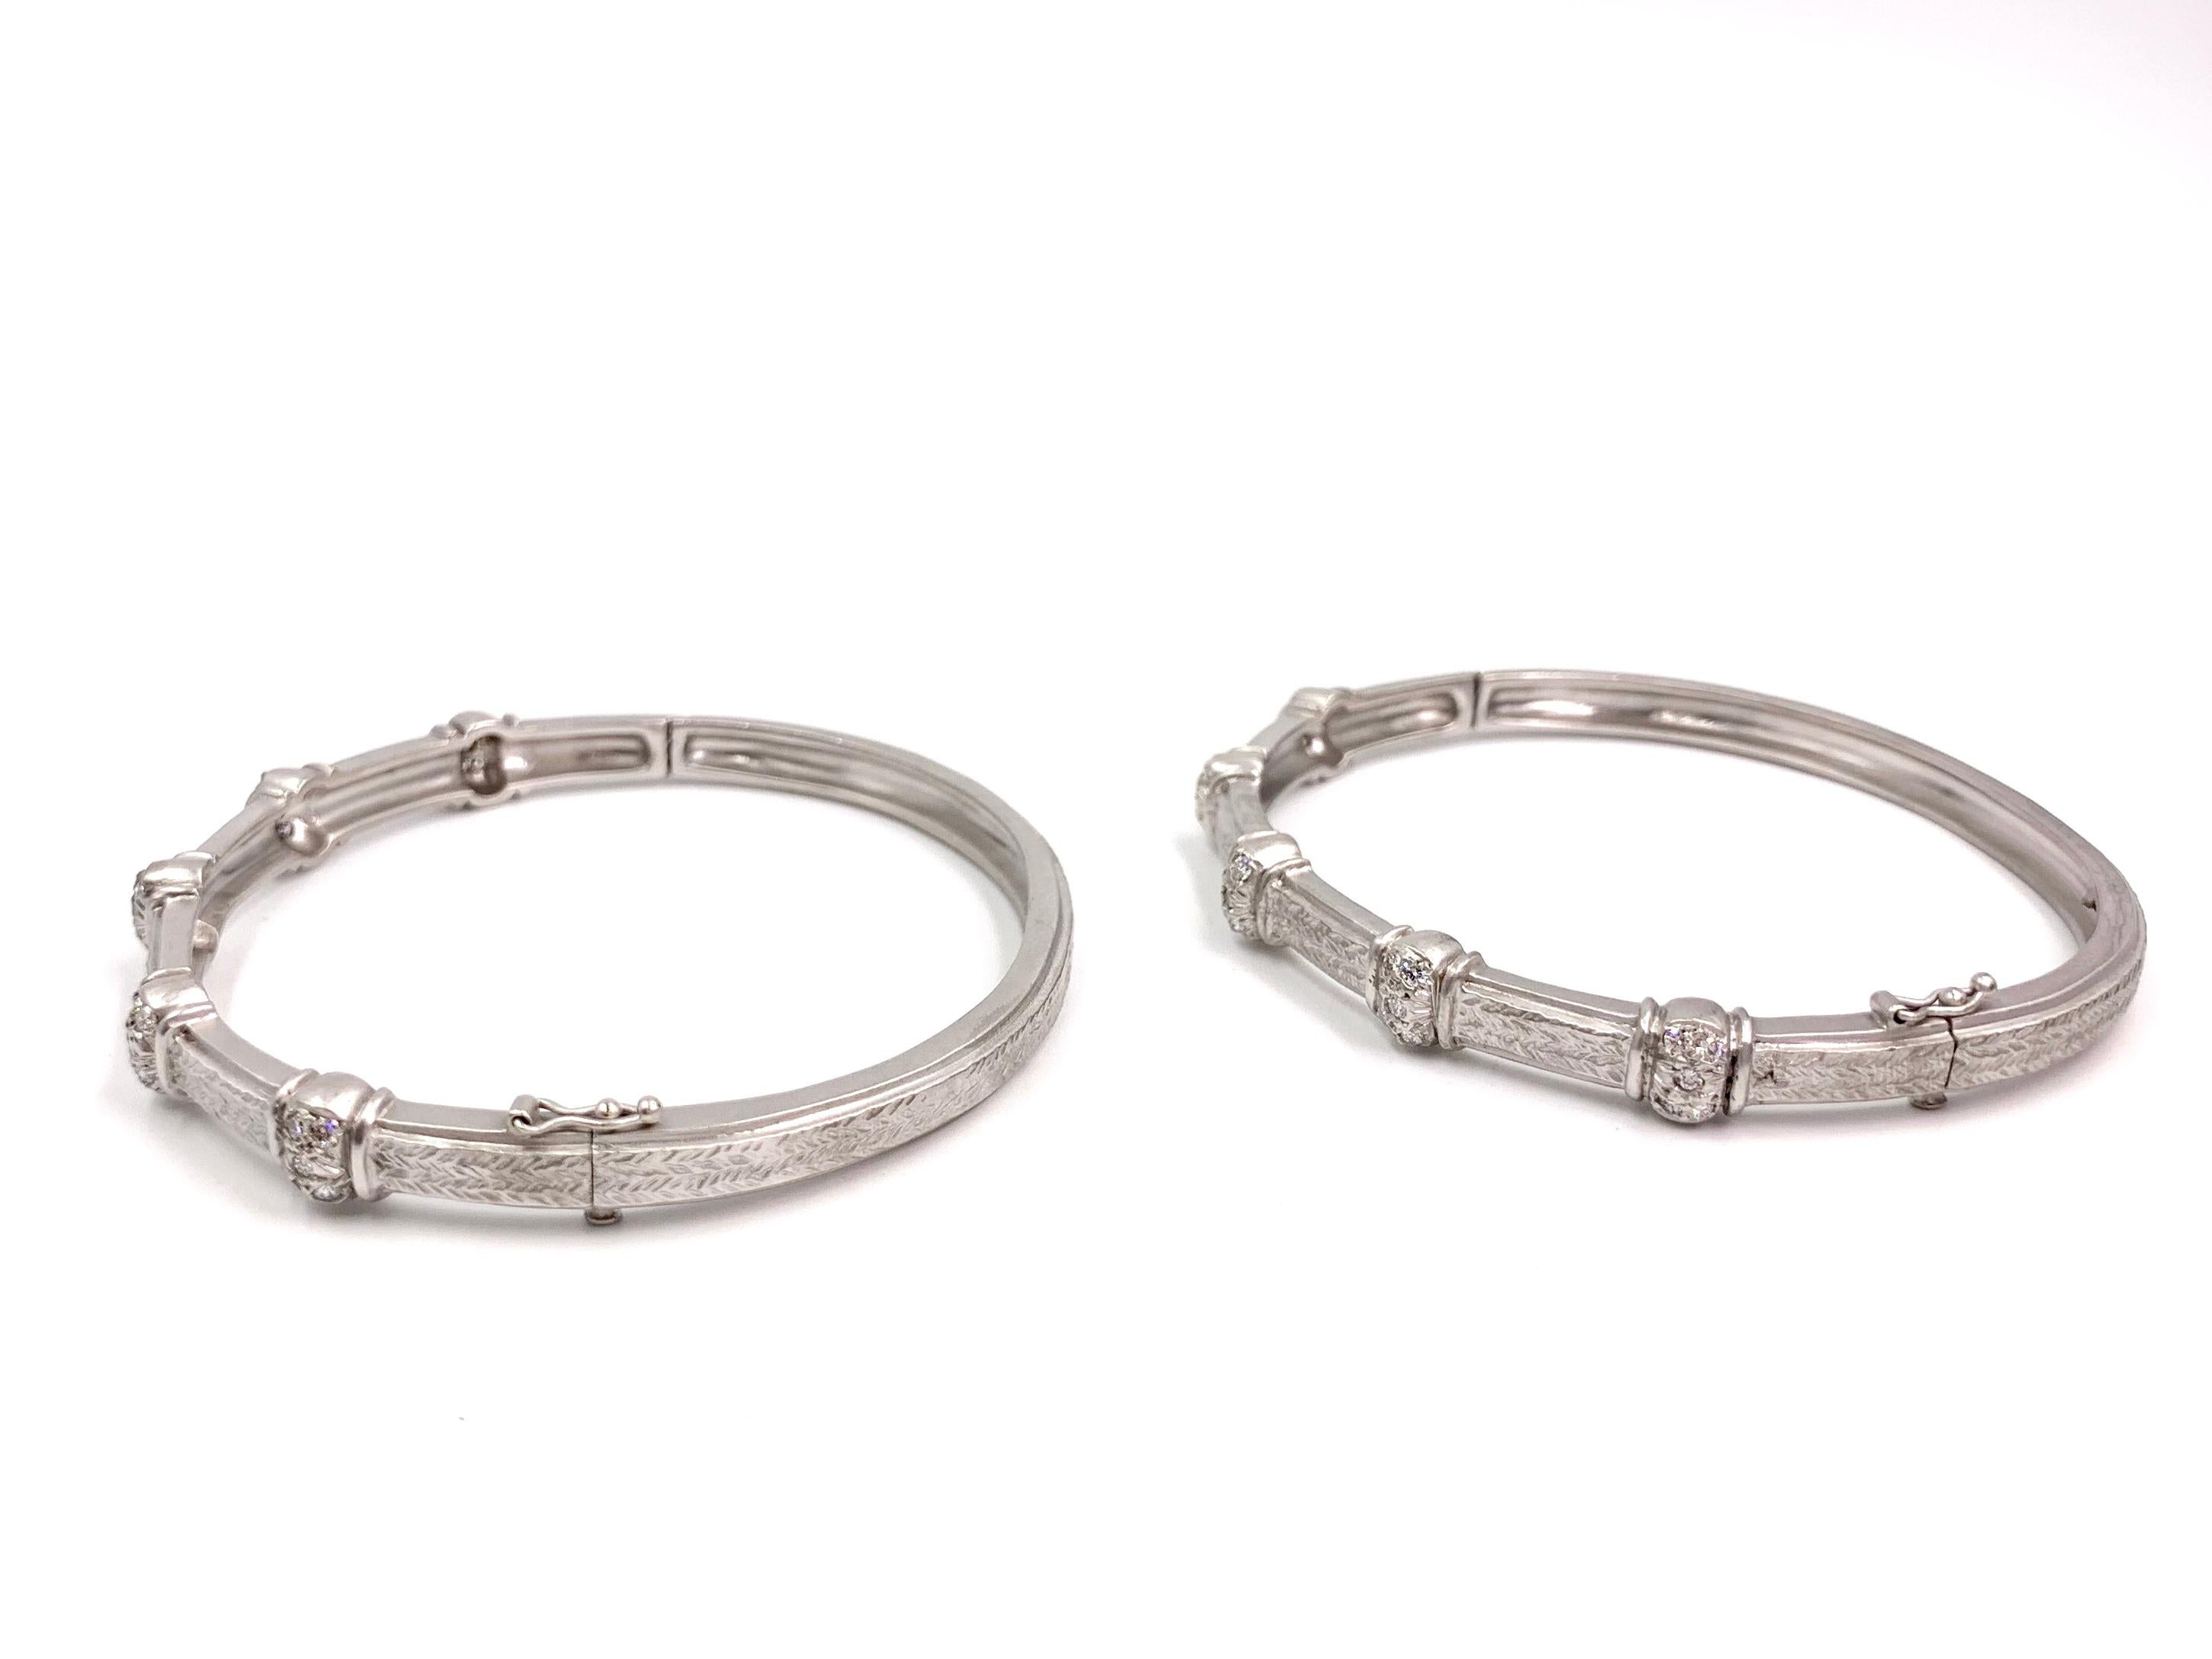 Doris Panos Set of Two 18 Karat White Gold and Diamond Carved Bangle Bracelets In Good Condition For Sale In Pikesville, MD